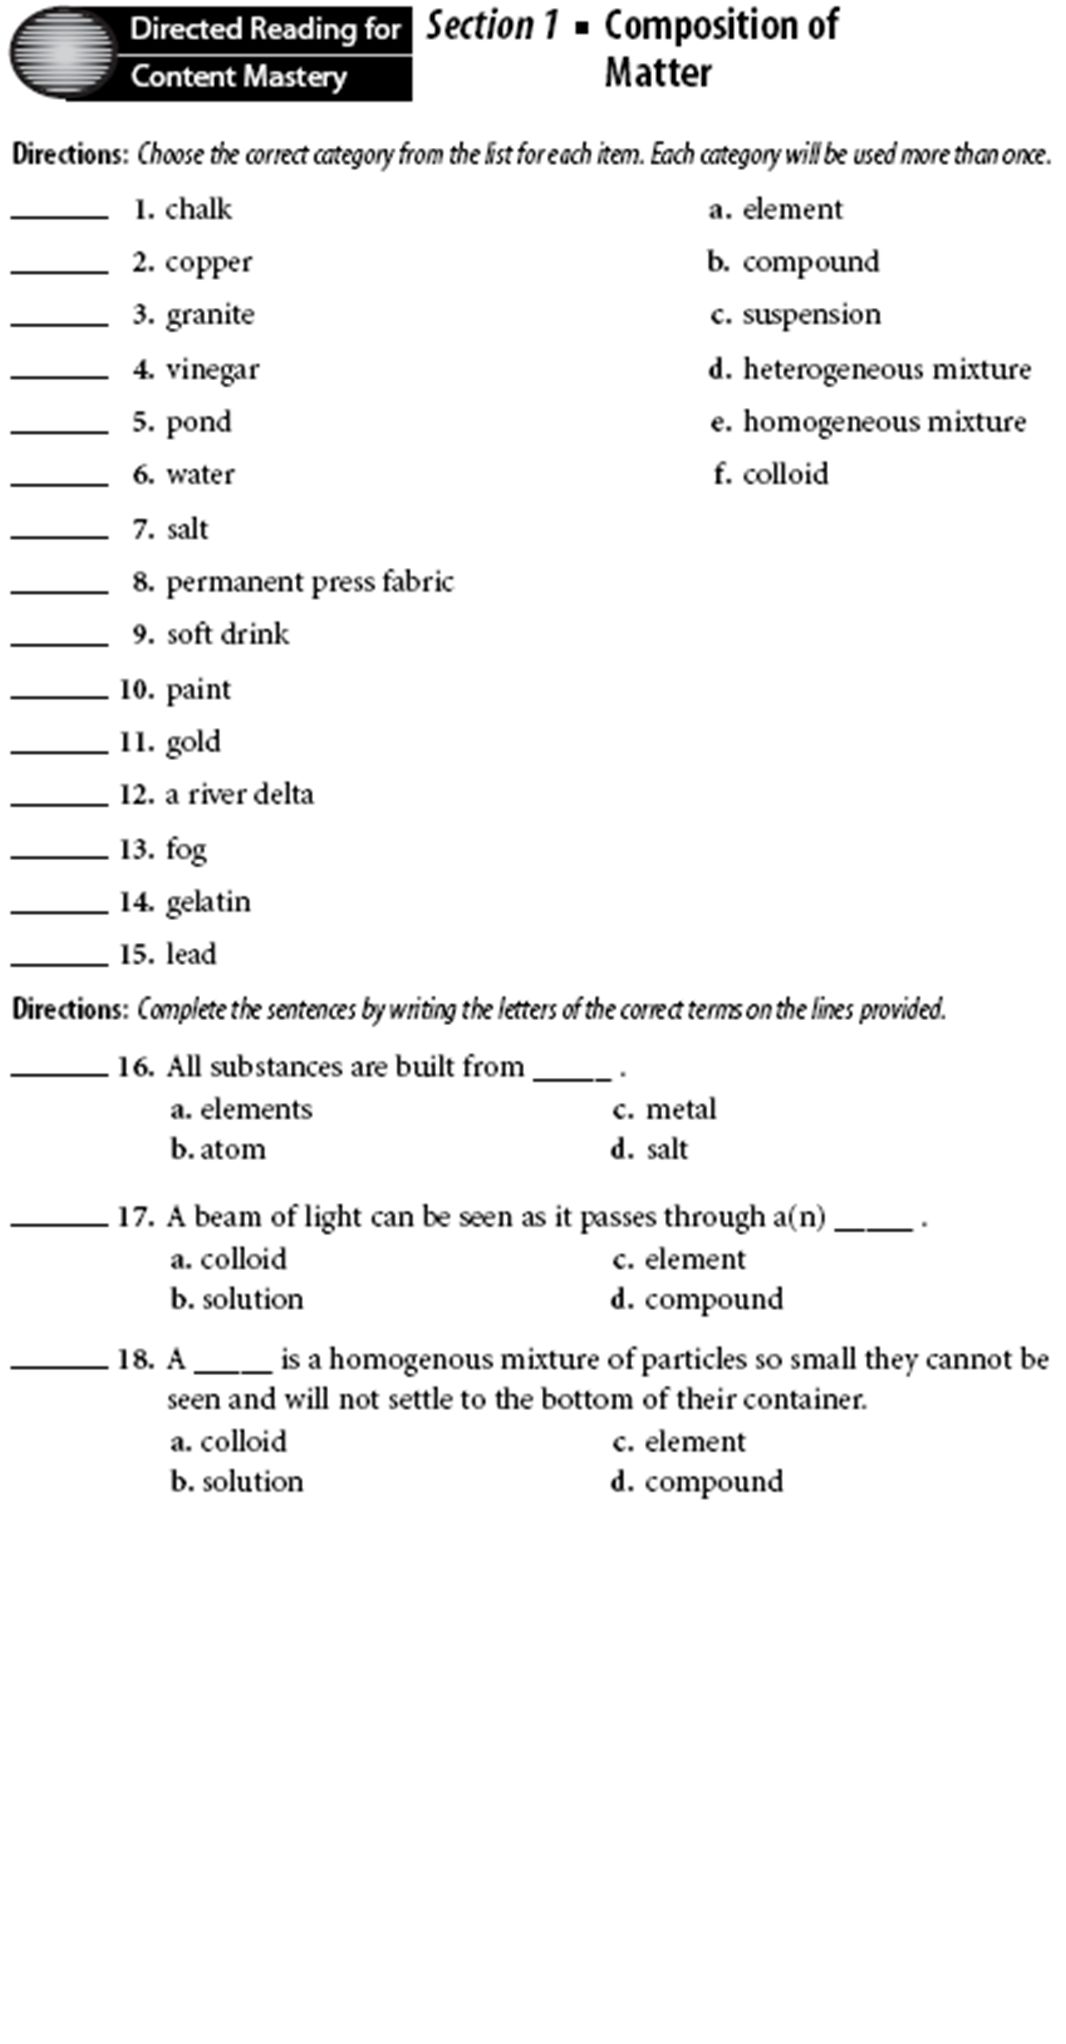 CLASSIFICATION OF MATTER - ppt video online download Inside Composition Of Matter Worksheet Answers